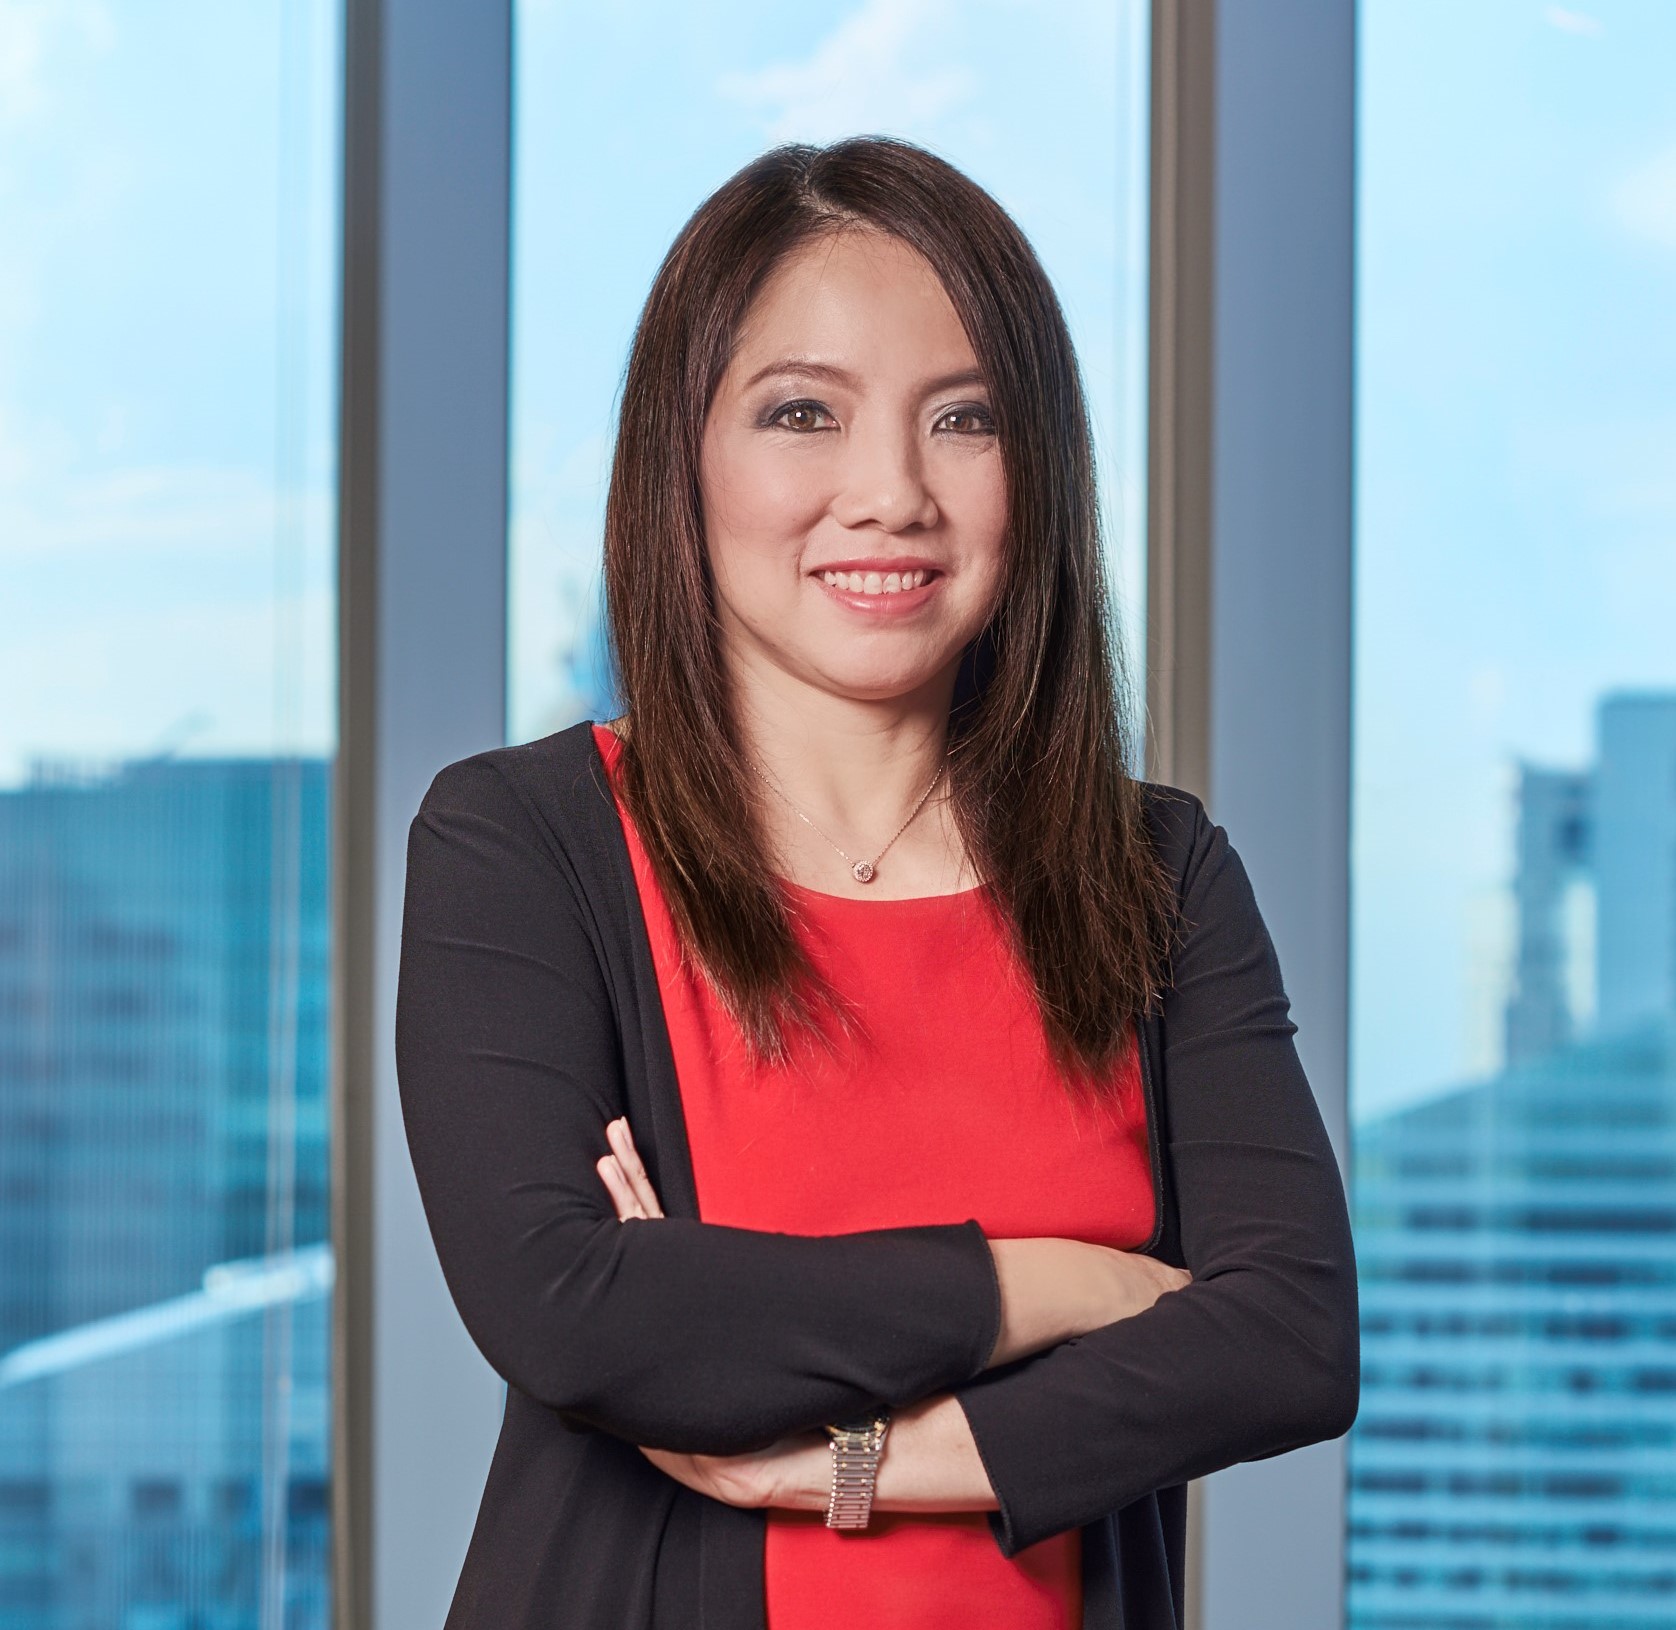 Tan Su Shan, DBS' group head of institutional banking